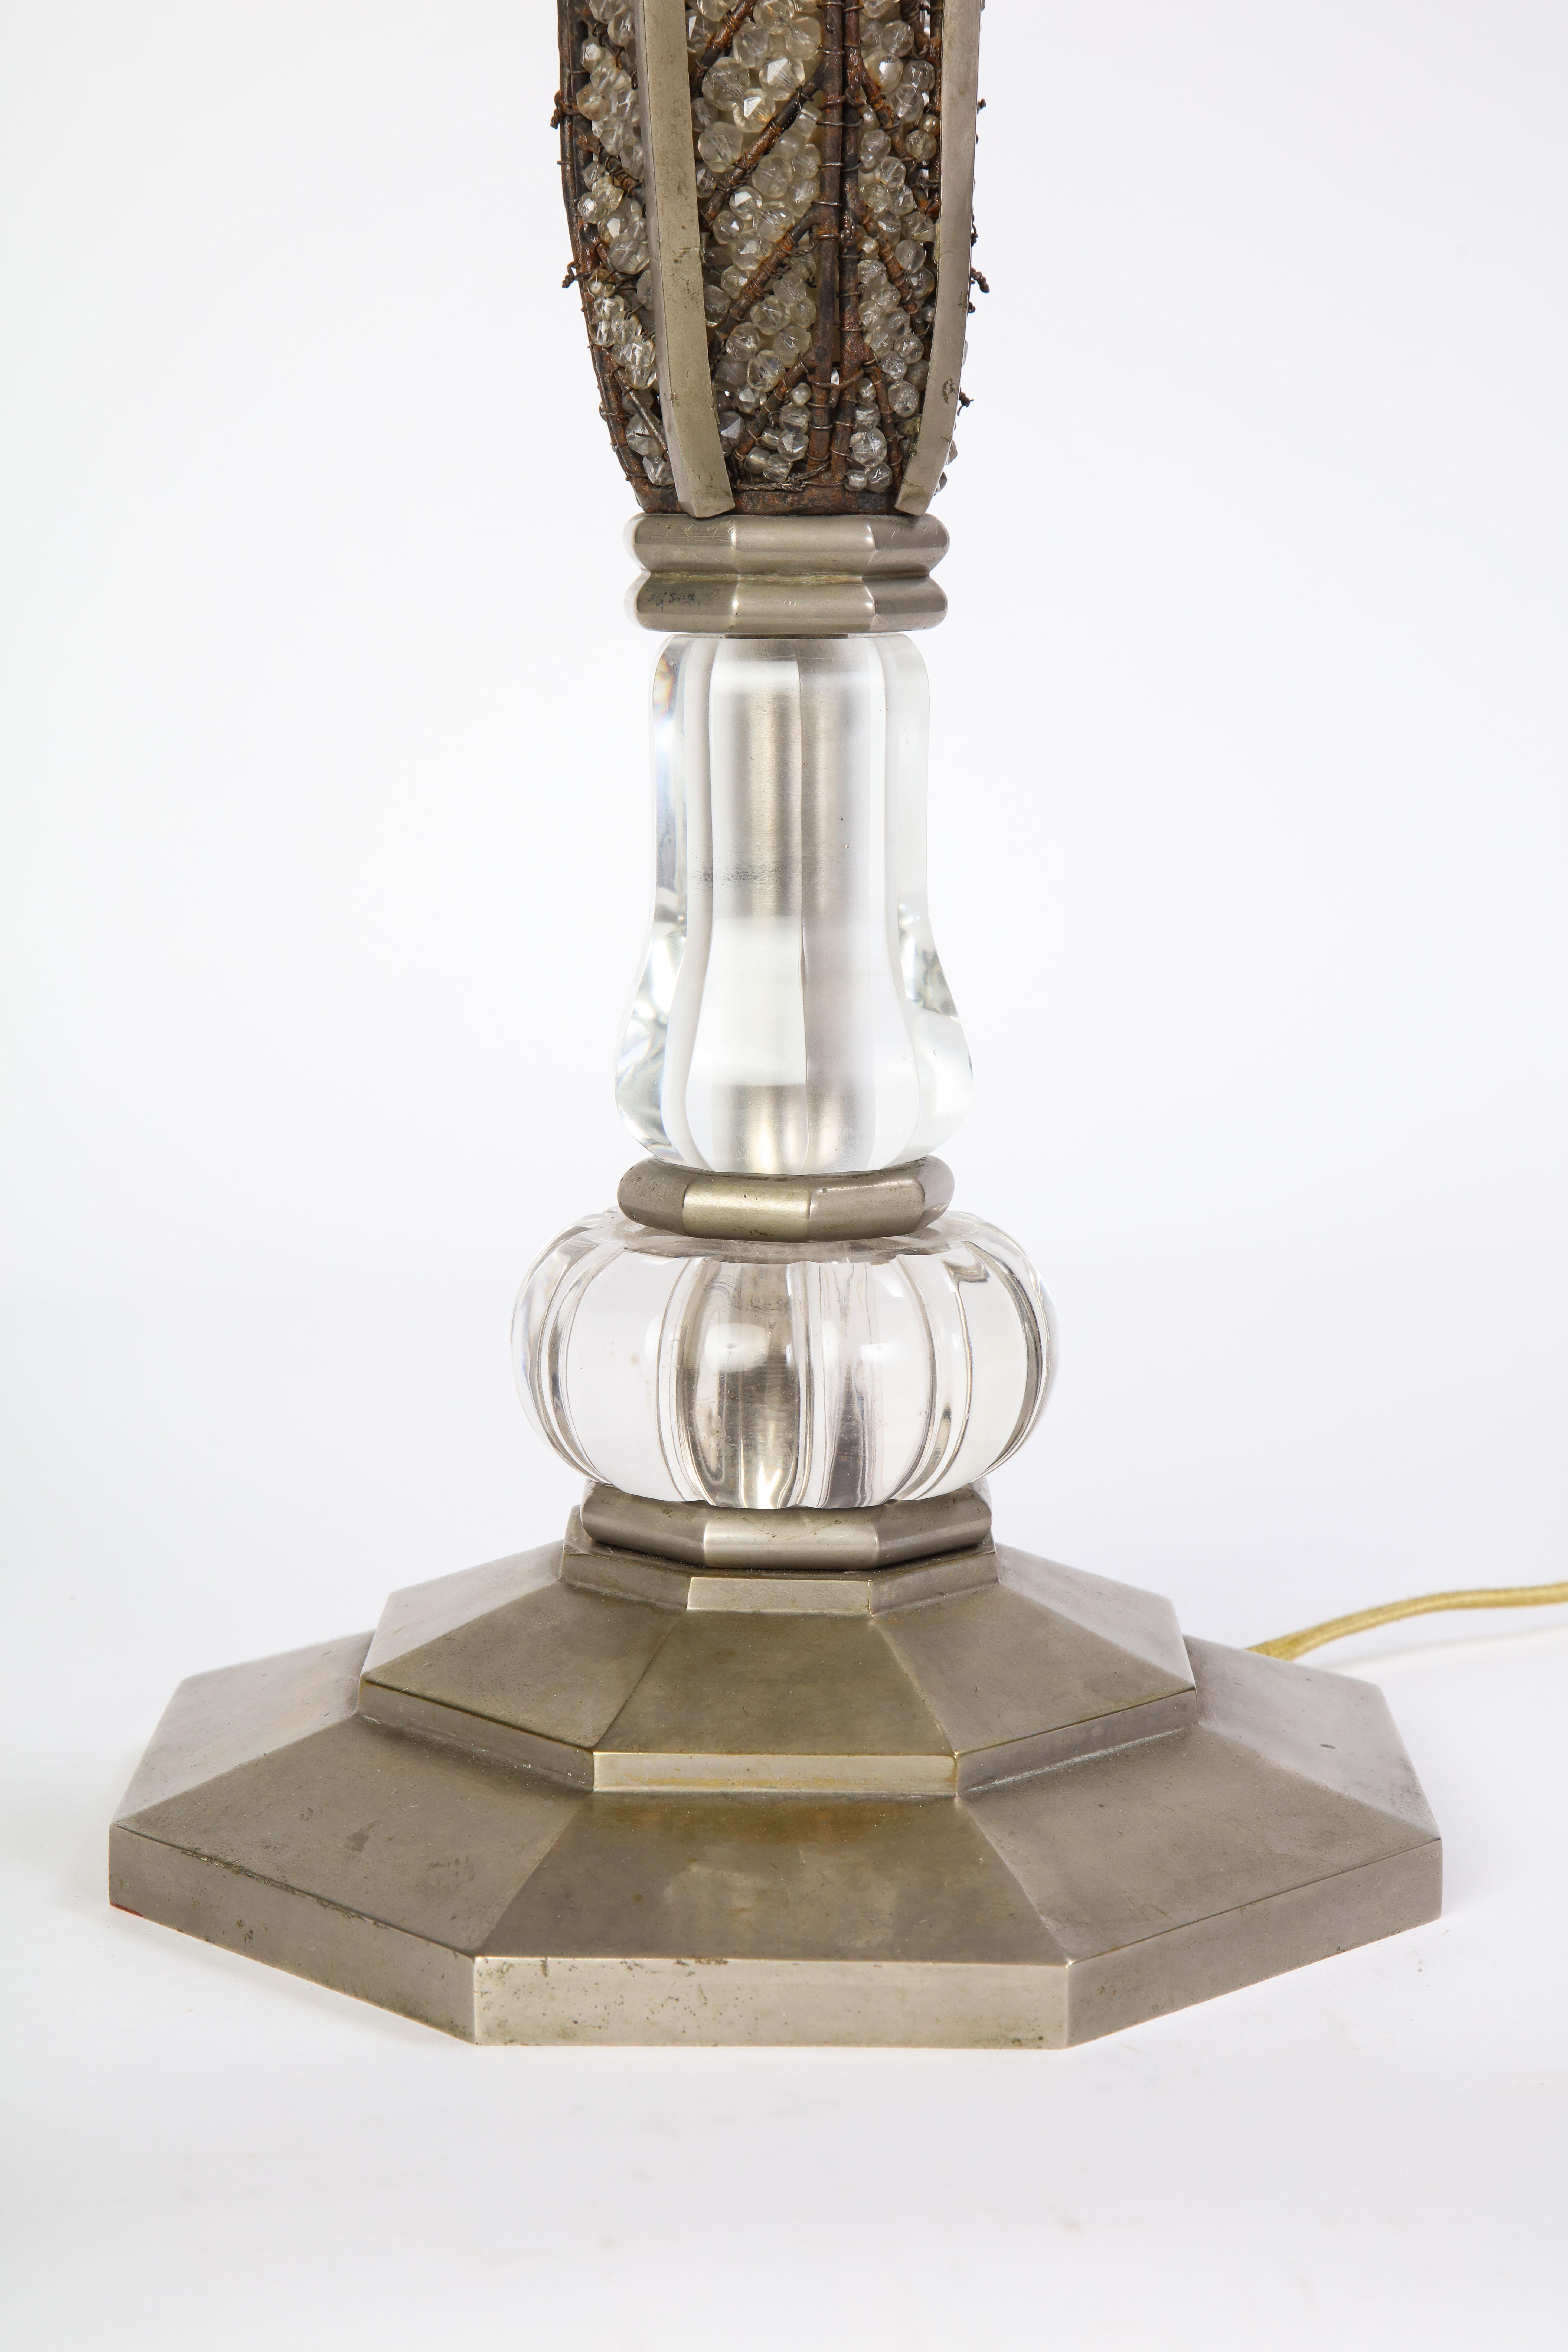 French Beaded Glass Table Lamp, Attributed To Maison Bagues, Circa 1925 For Sale 9